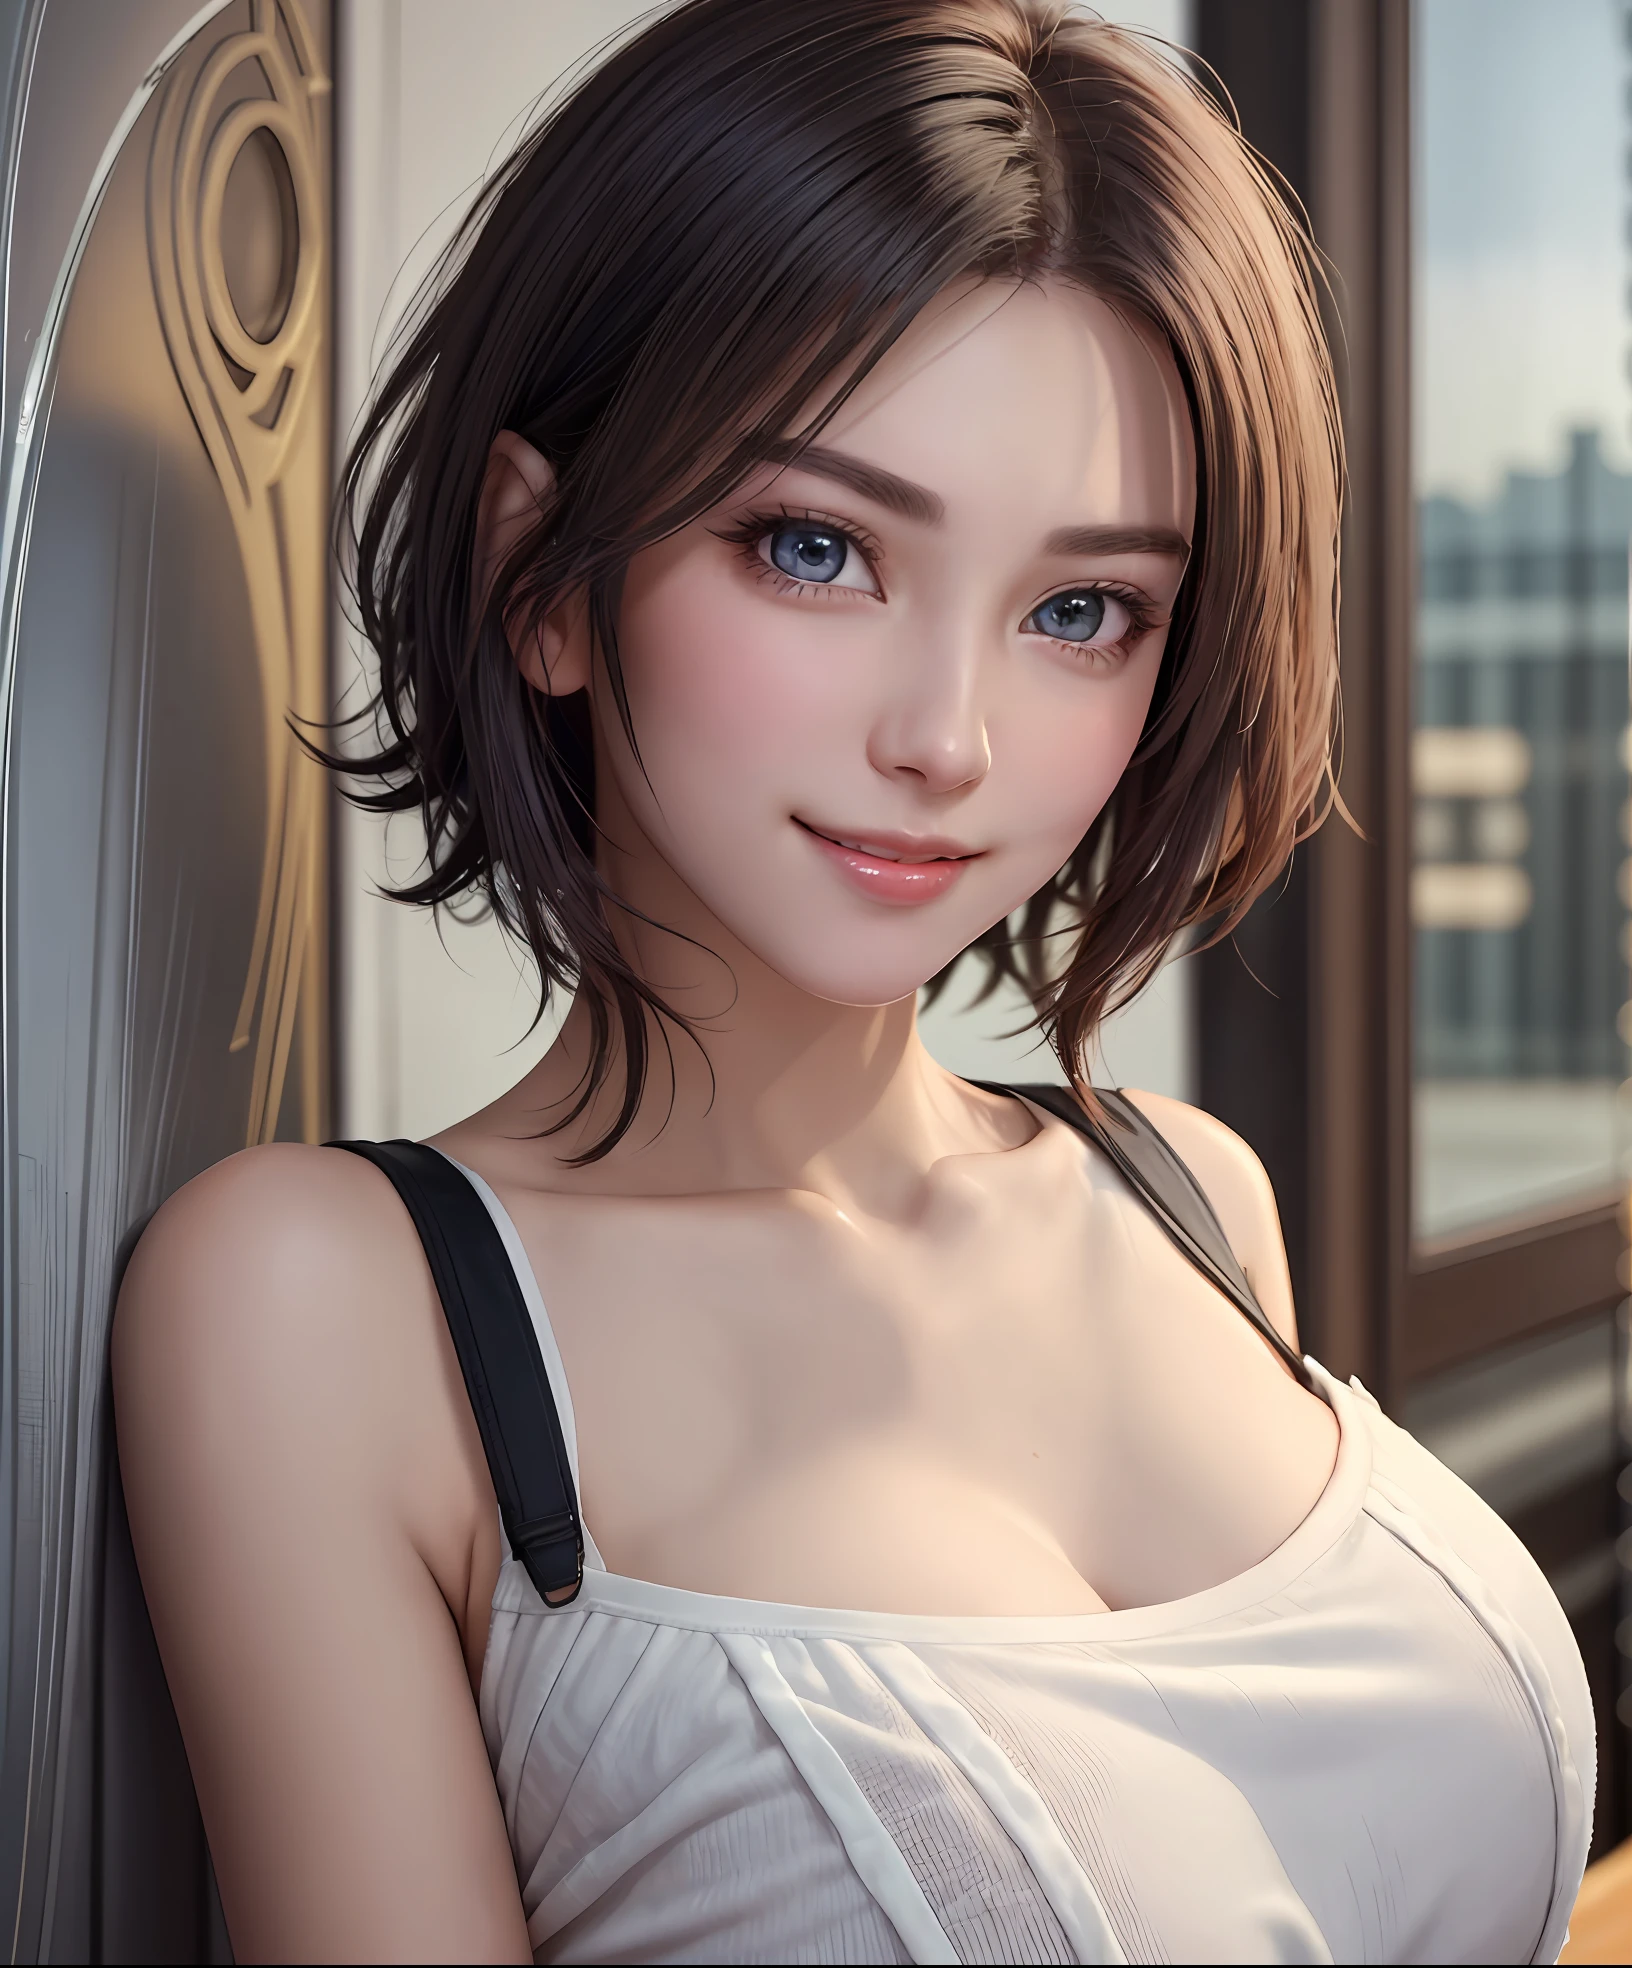 Best Quality, Ultra High Resolution, (Photorealistic: 1.4), Beautiful Eyes, Super Beautiful, Very Short Hair, Beautiful, Sweetheart, T-shirt with Rough Chest, Beautiful Soldier, Eyes That Invite Viewer, Lover's Perspective, Inviting Expression, Sexy Smile, Perfect Style, Perfect Balance, Detailed Skin, Naughty Gaze, Chest Visible